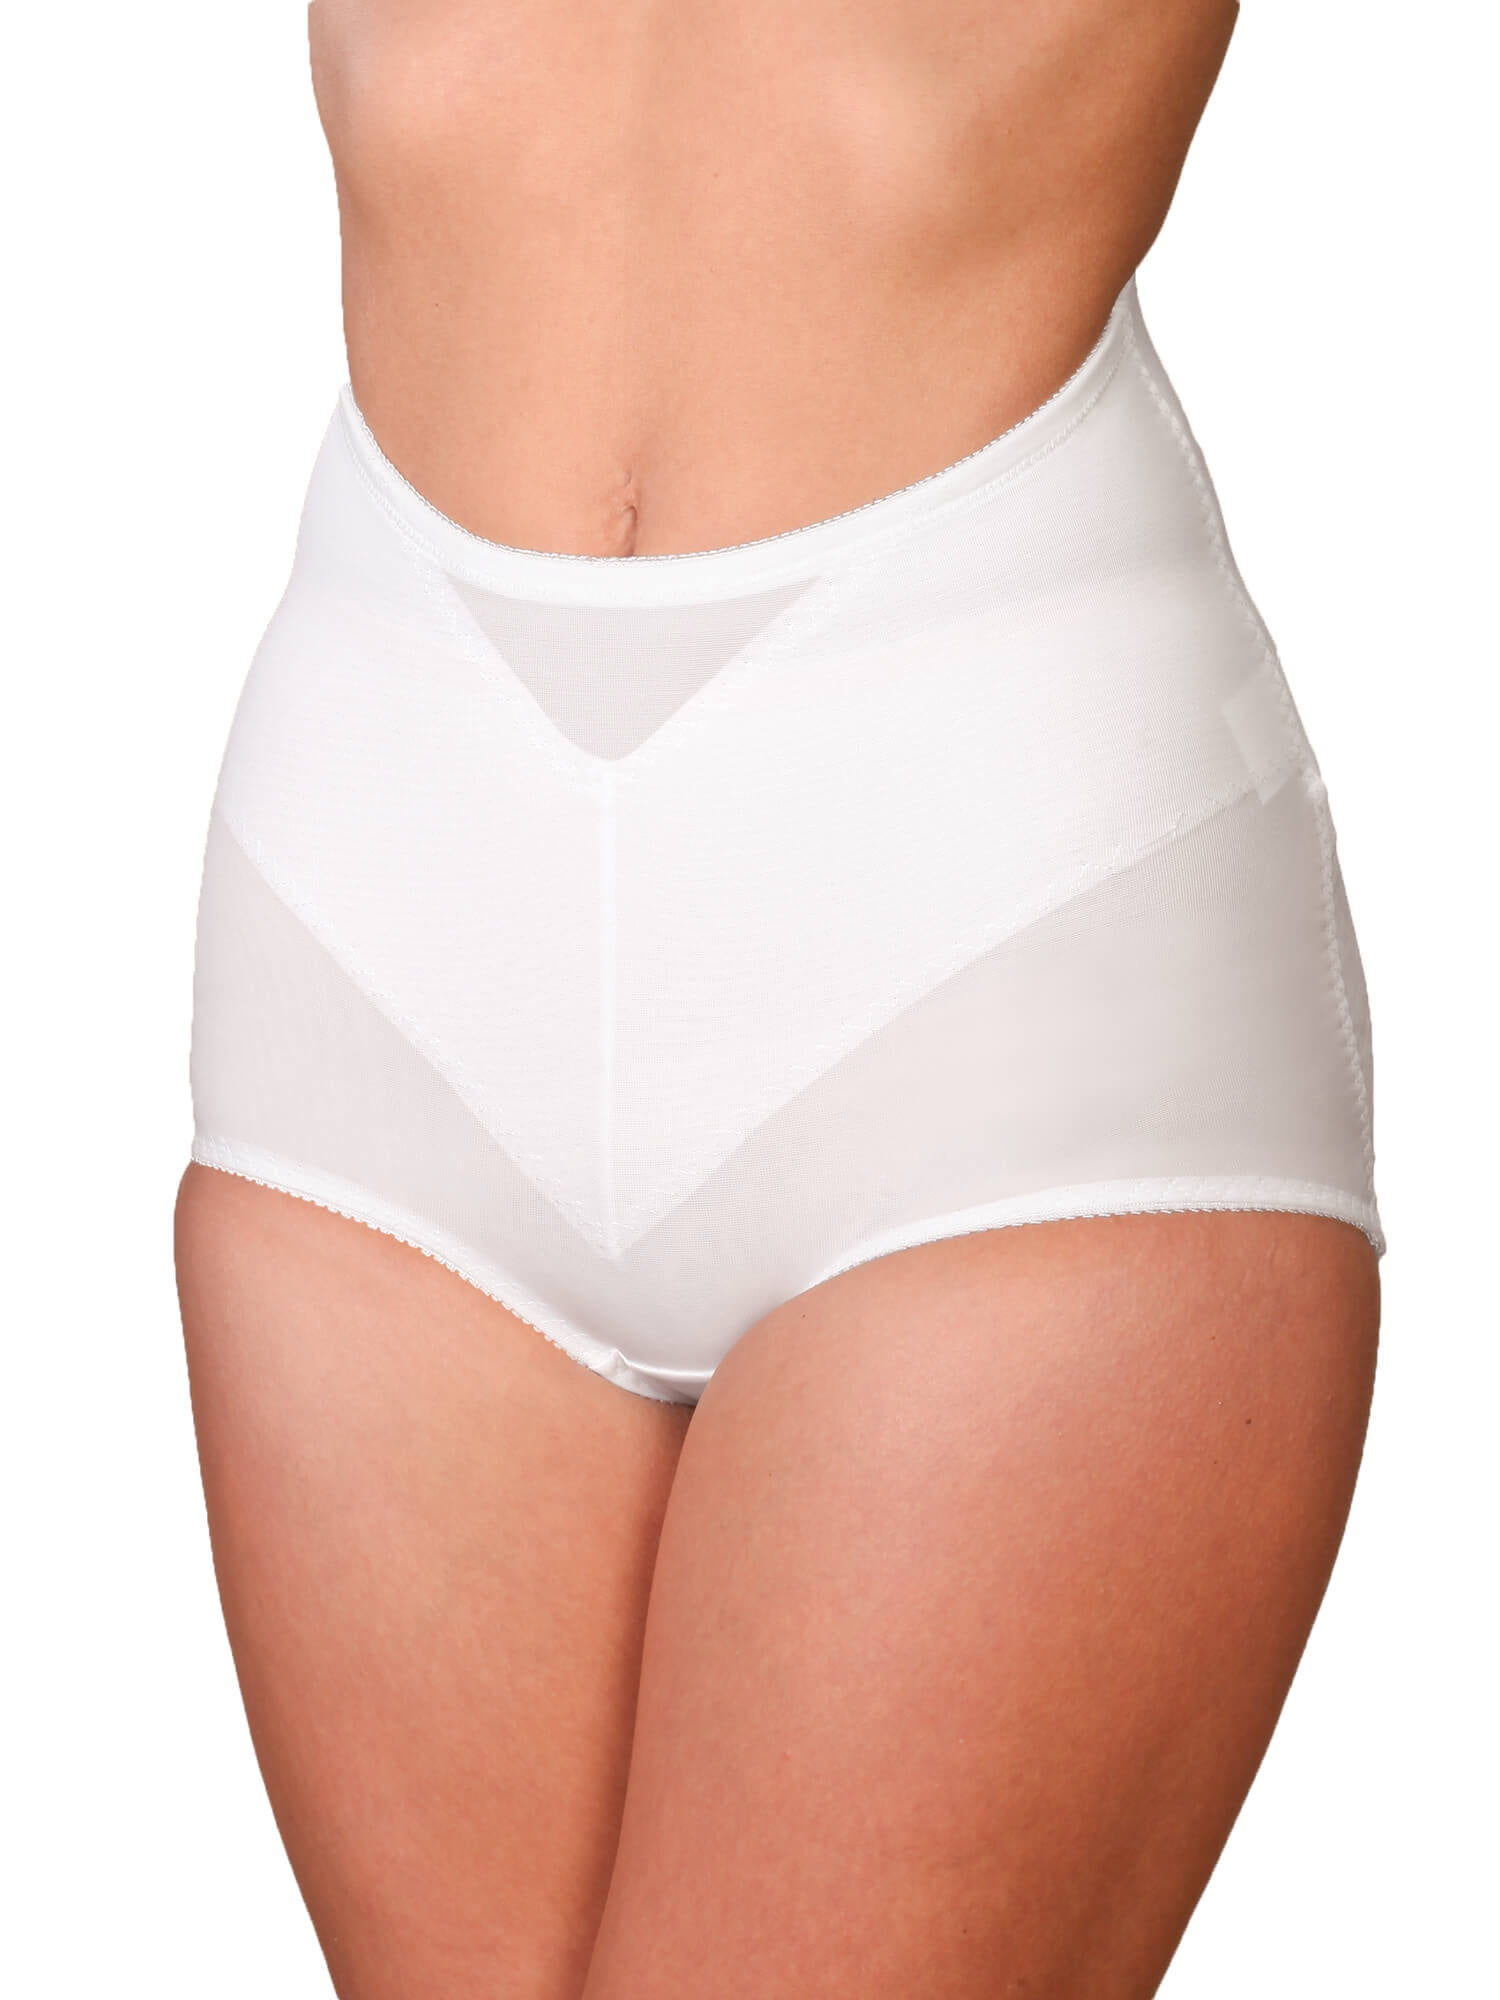 EasyComforts Lower Back Support Briefs, Nylon Material For Smooth Discrete  Fit, Abdominal Shapewear Undergarment, White - XL 